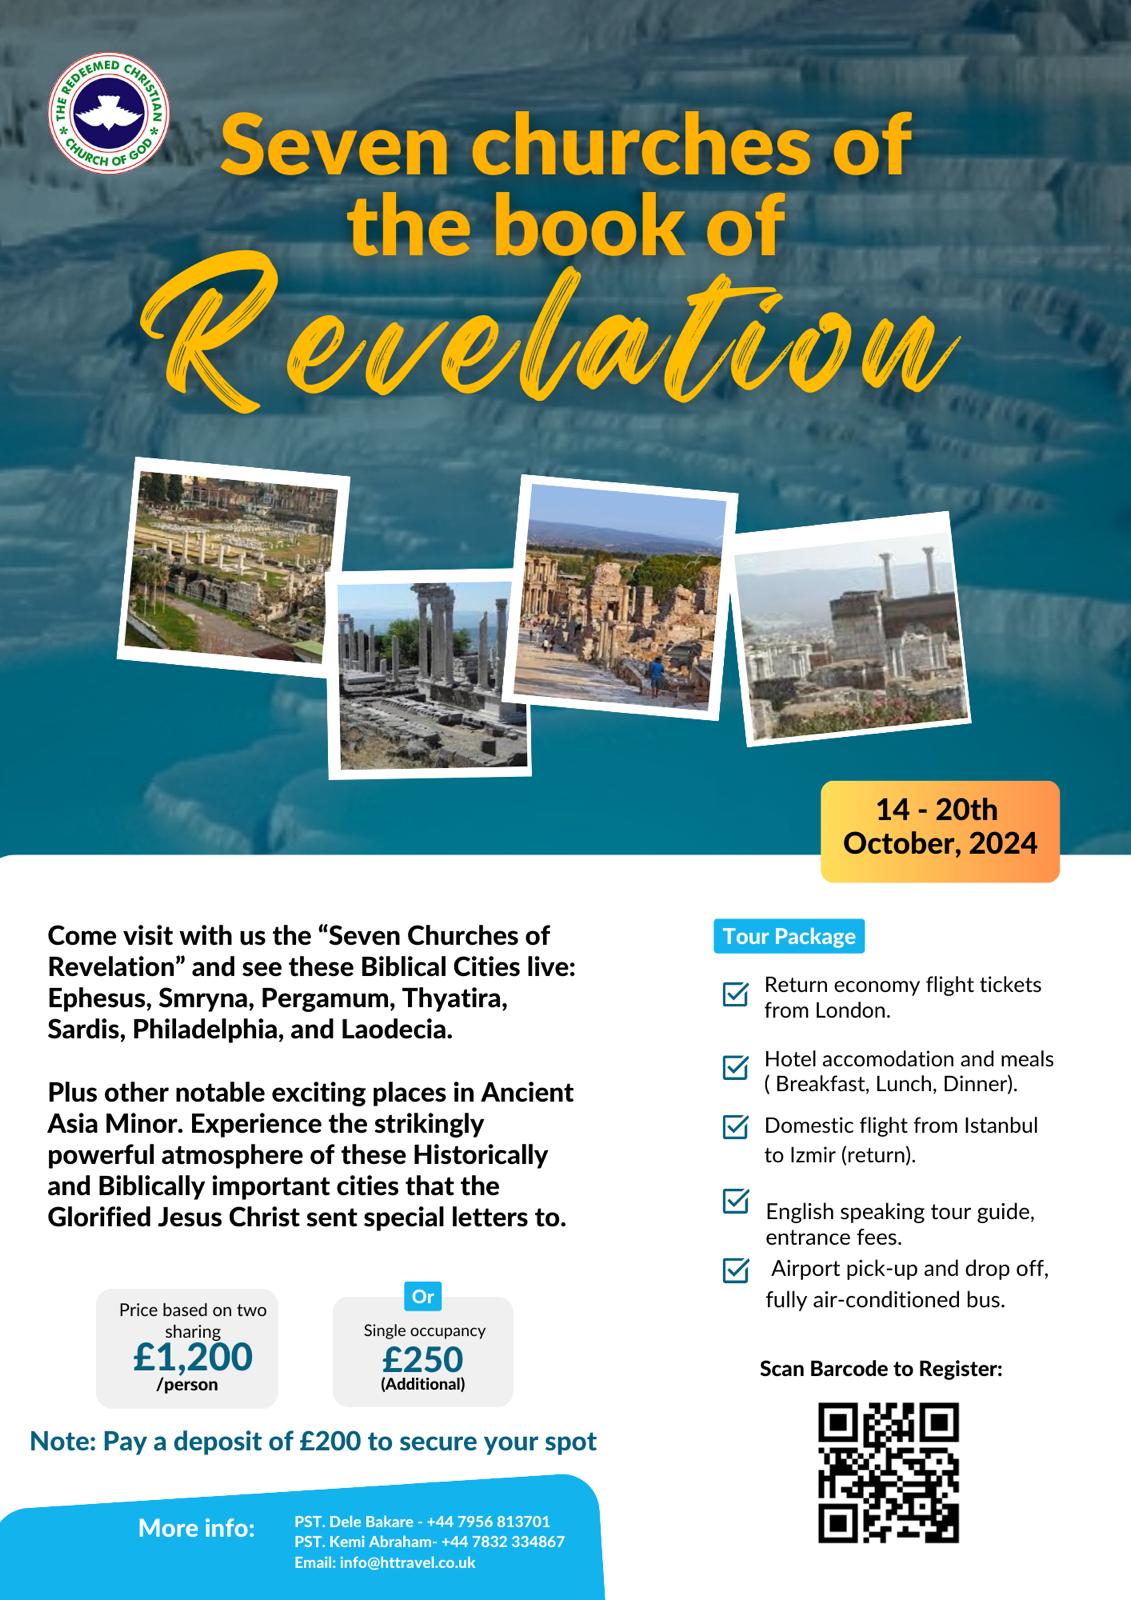 Trip to Greece - Seven churches of the book of Revelation